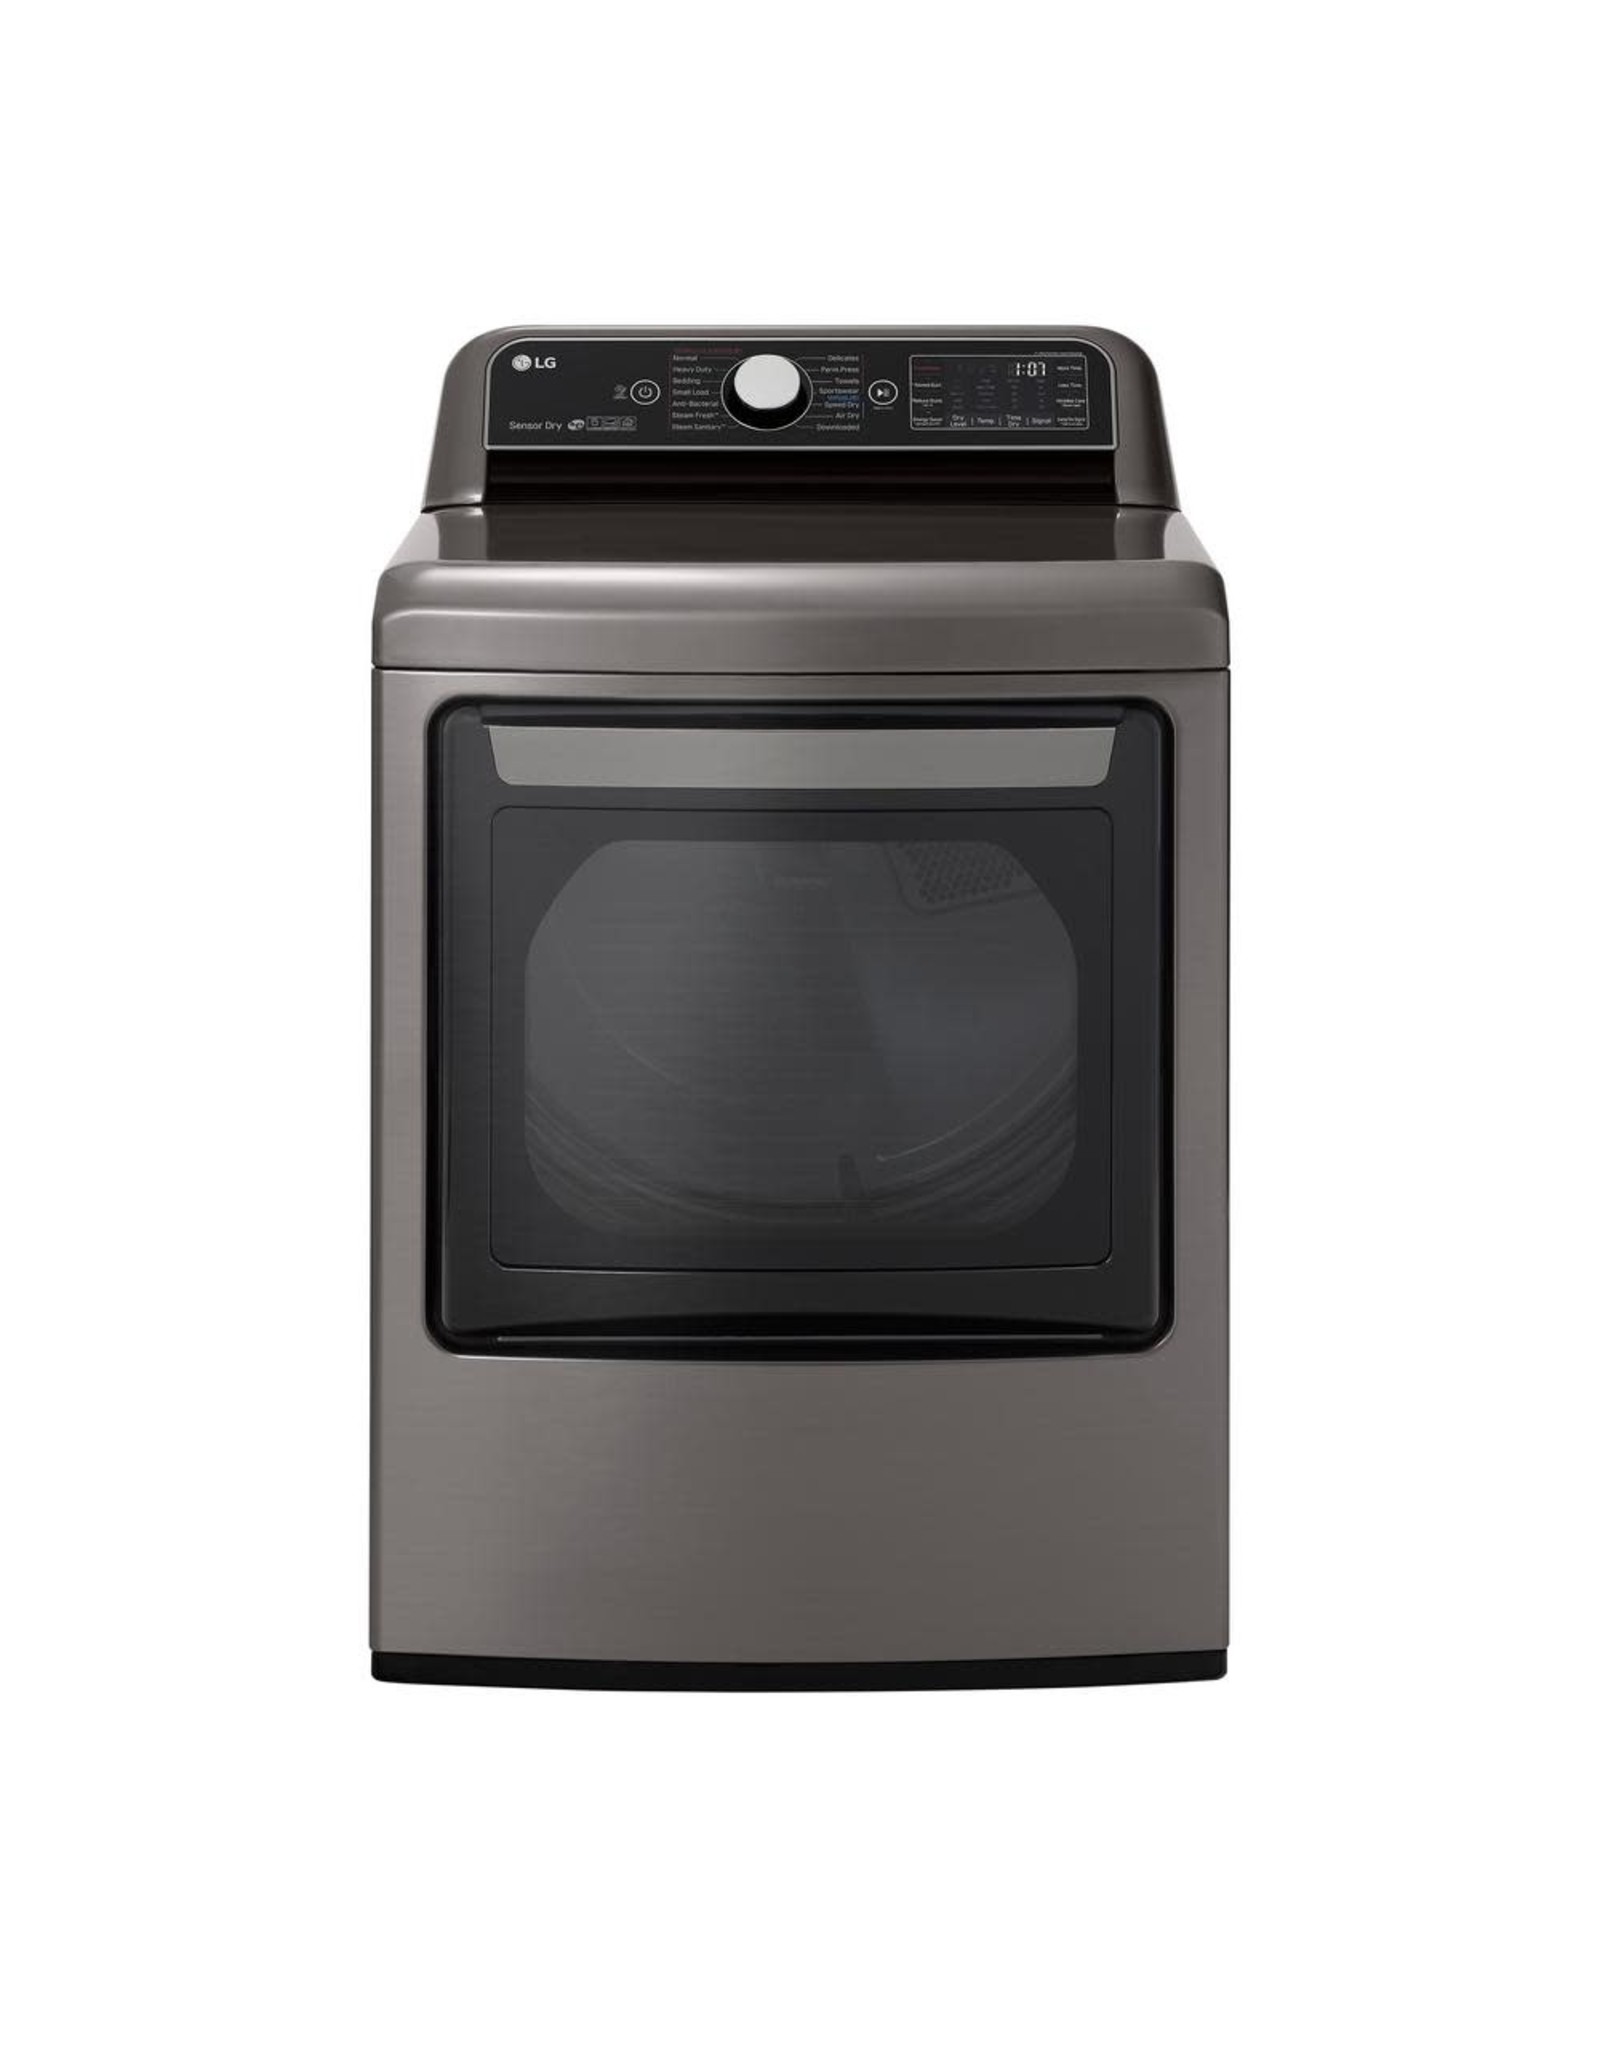 LG Electronics DLEX7800VE 7.3 cu. ft. Ultra Large Smart Front Load Electric Dryer w/ EasyLoad Door, TurboSteam & Wi-Fi Enabled in Graphite Steel